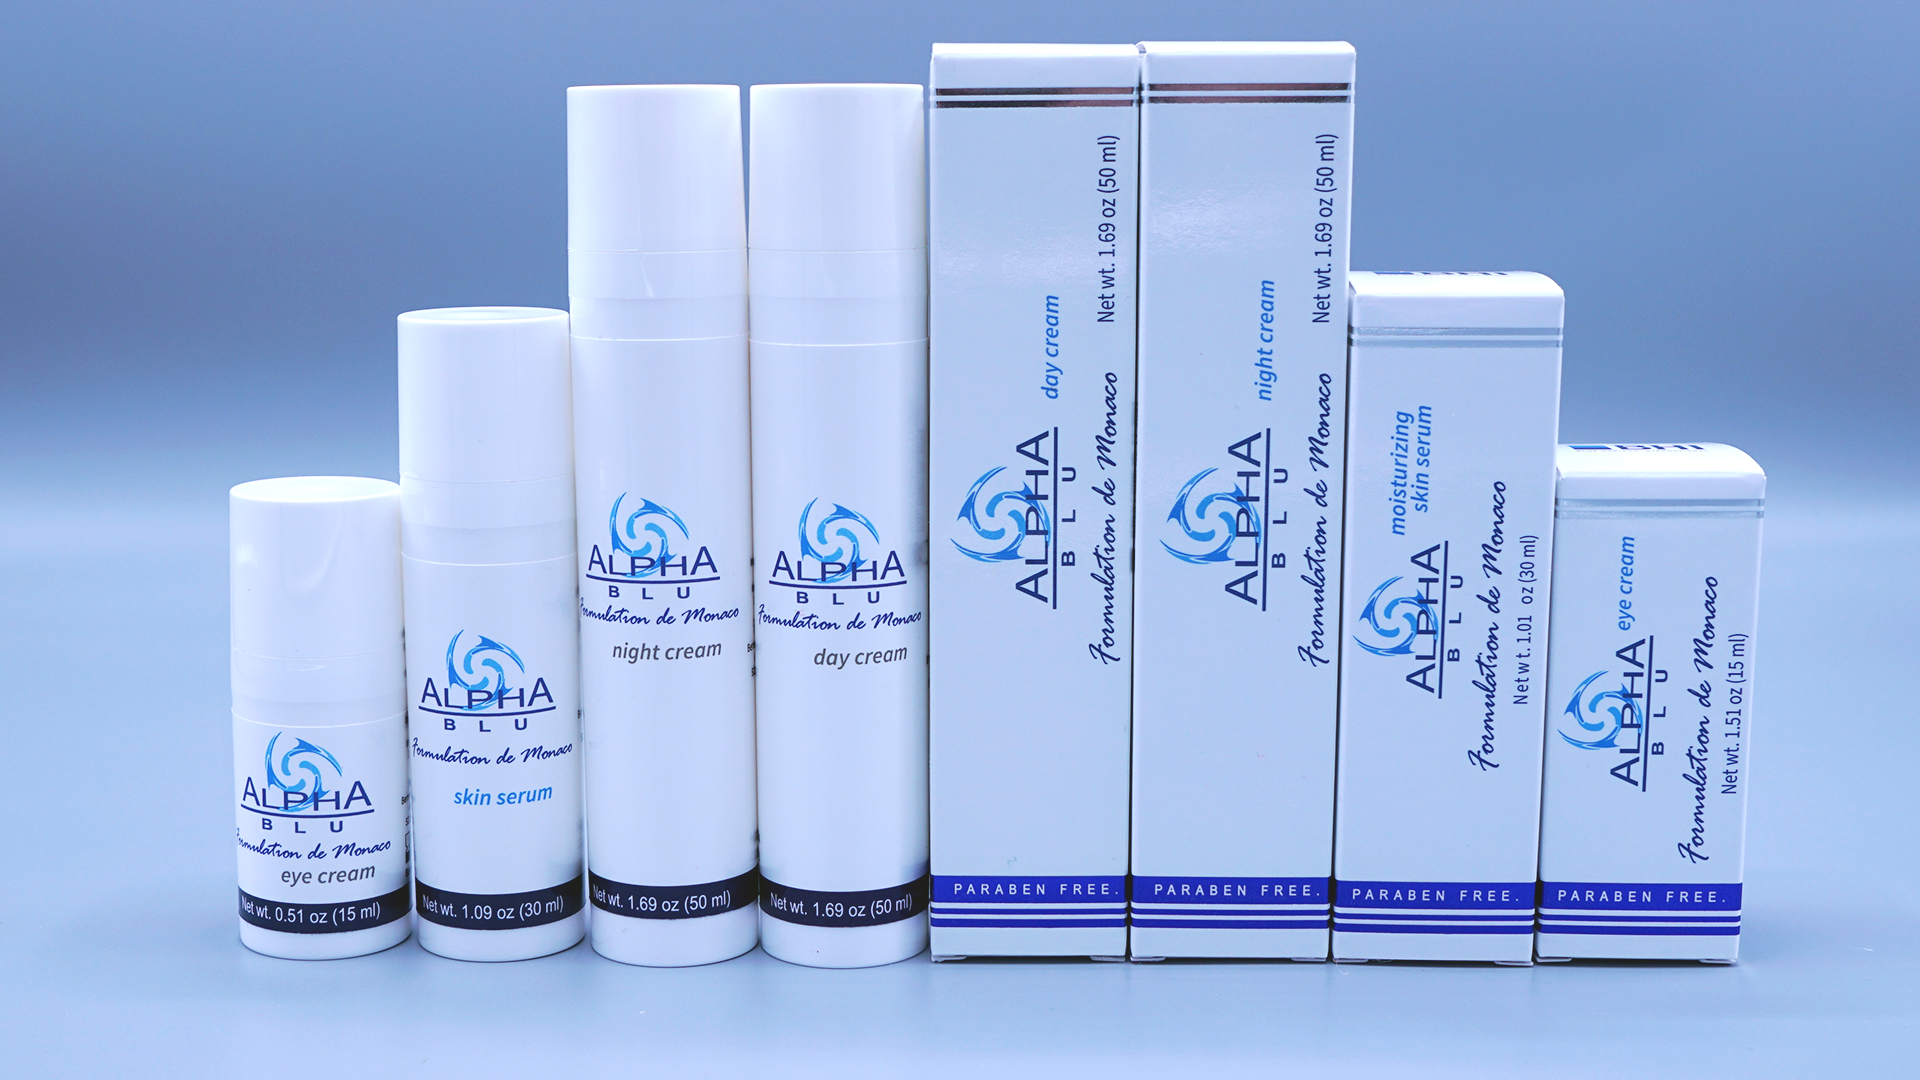 Alpha Blu Skin Care introduces its new Monaco line during New York Fashion Week